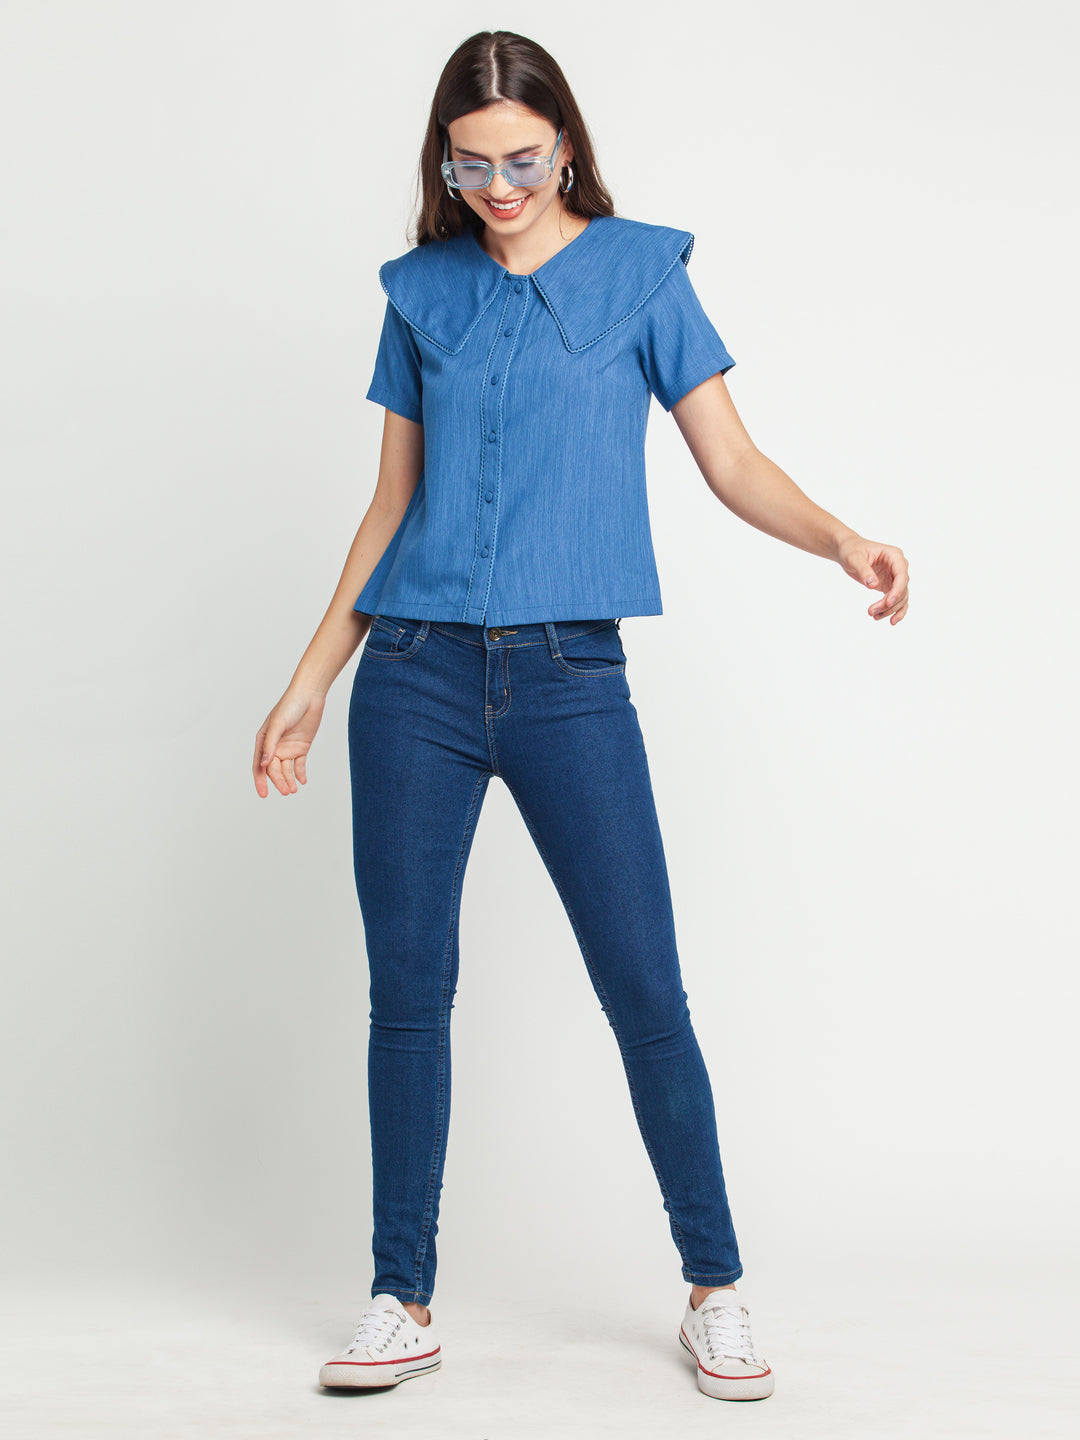 Blue Solid Lace Insert Shirt For Women